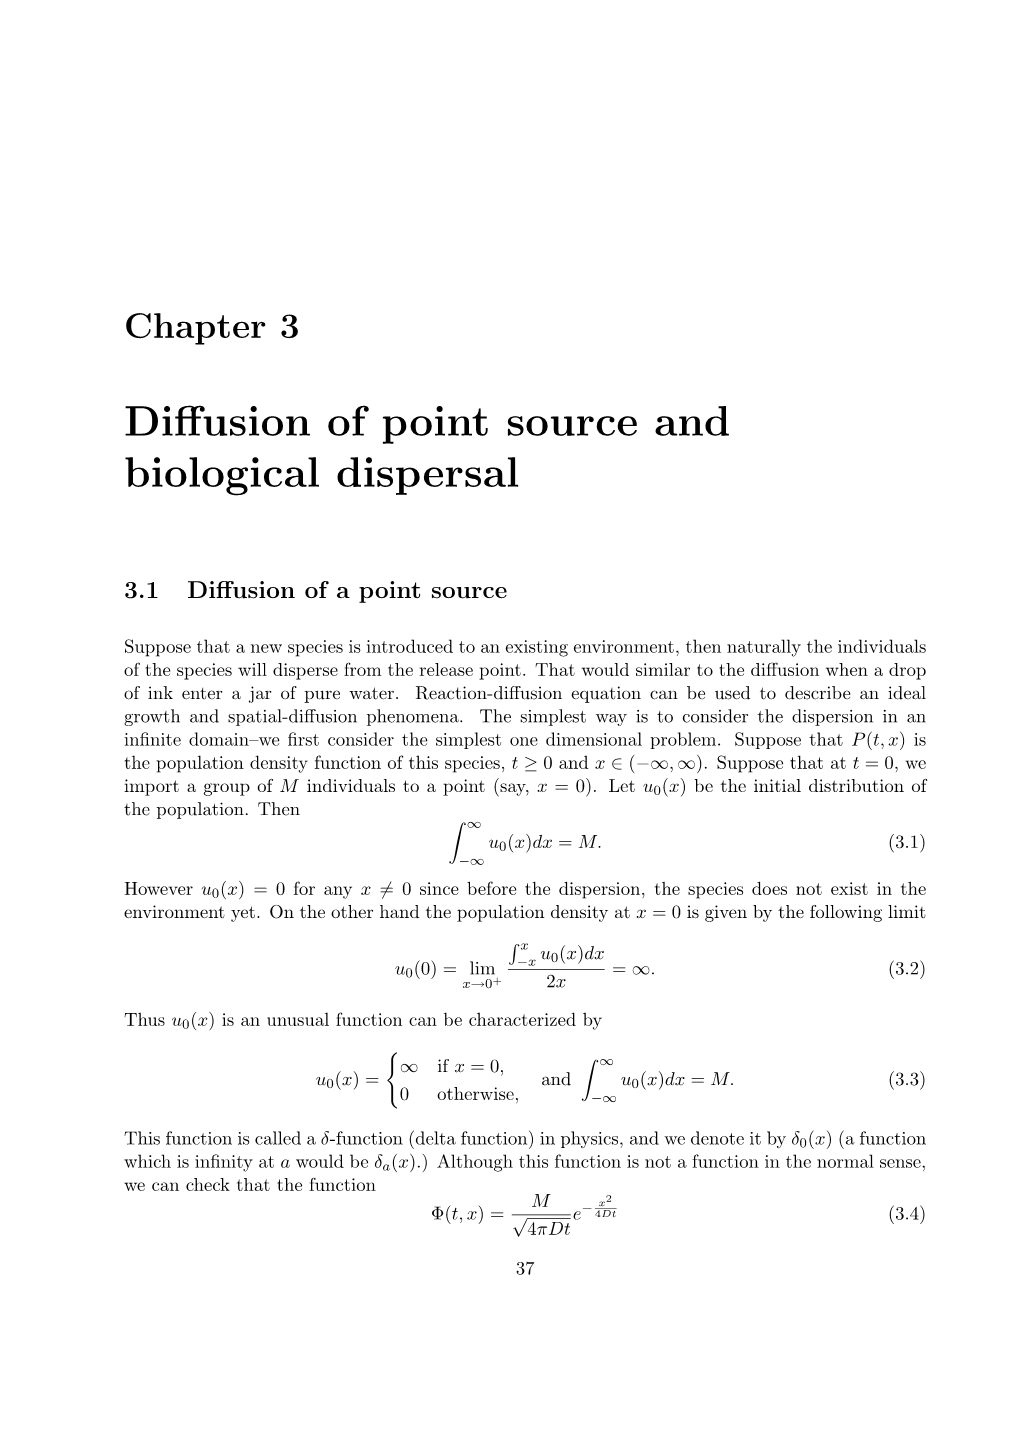 Diffusion of Point Source and Biological Dispersal